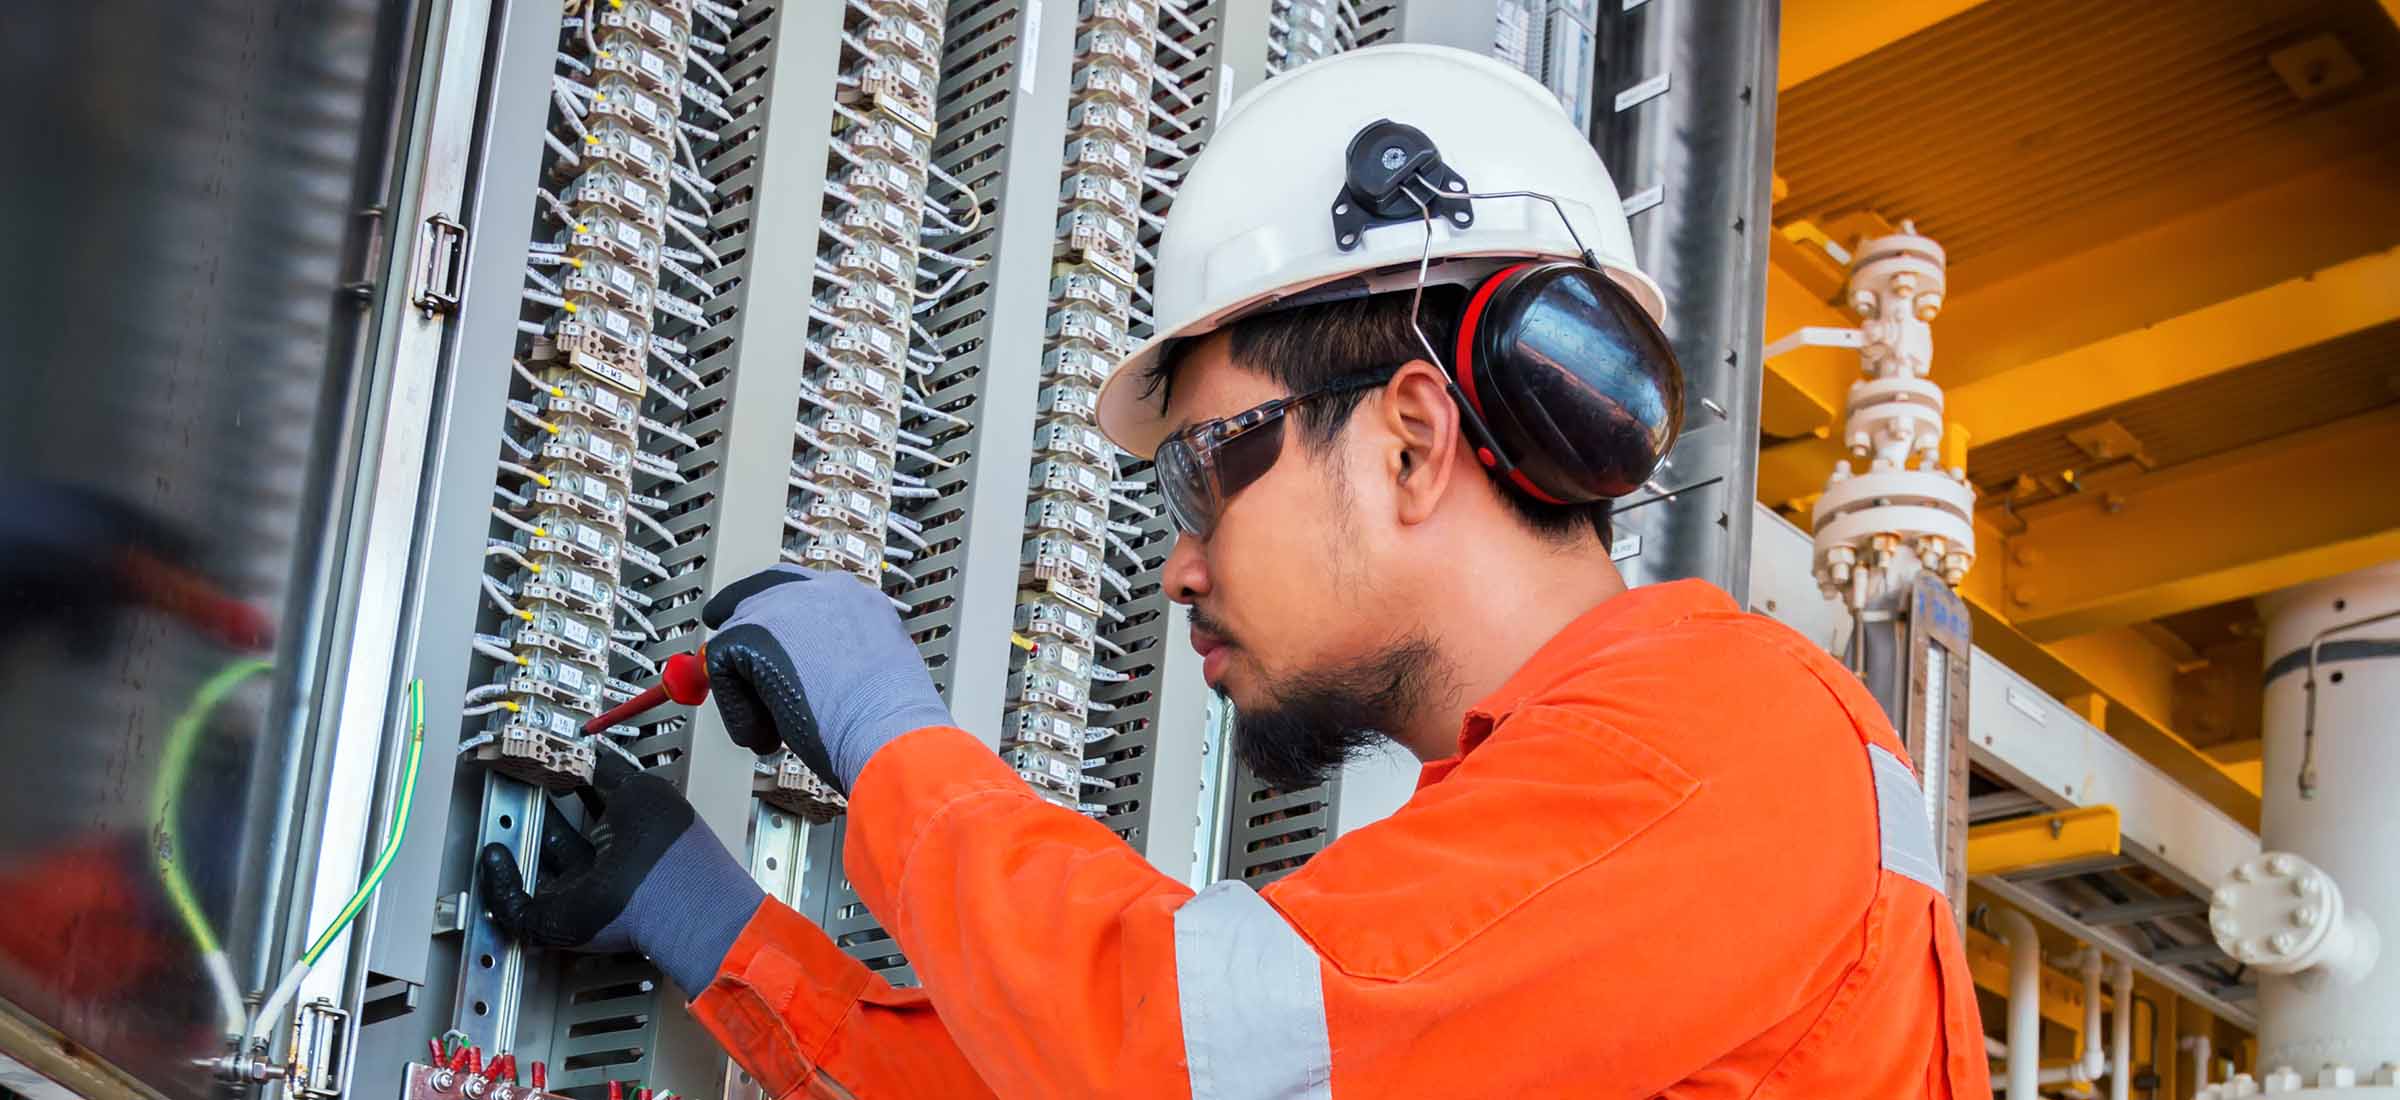 instrumentation electrical troubleshooting